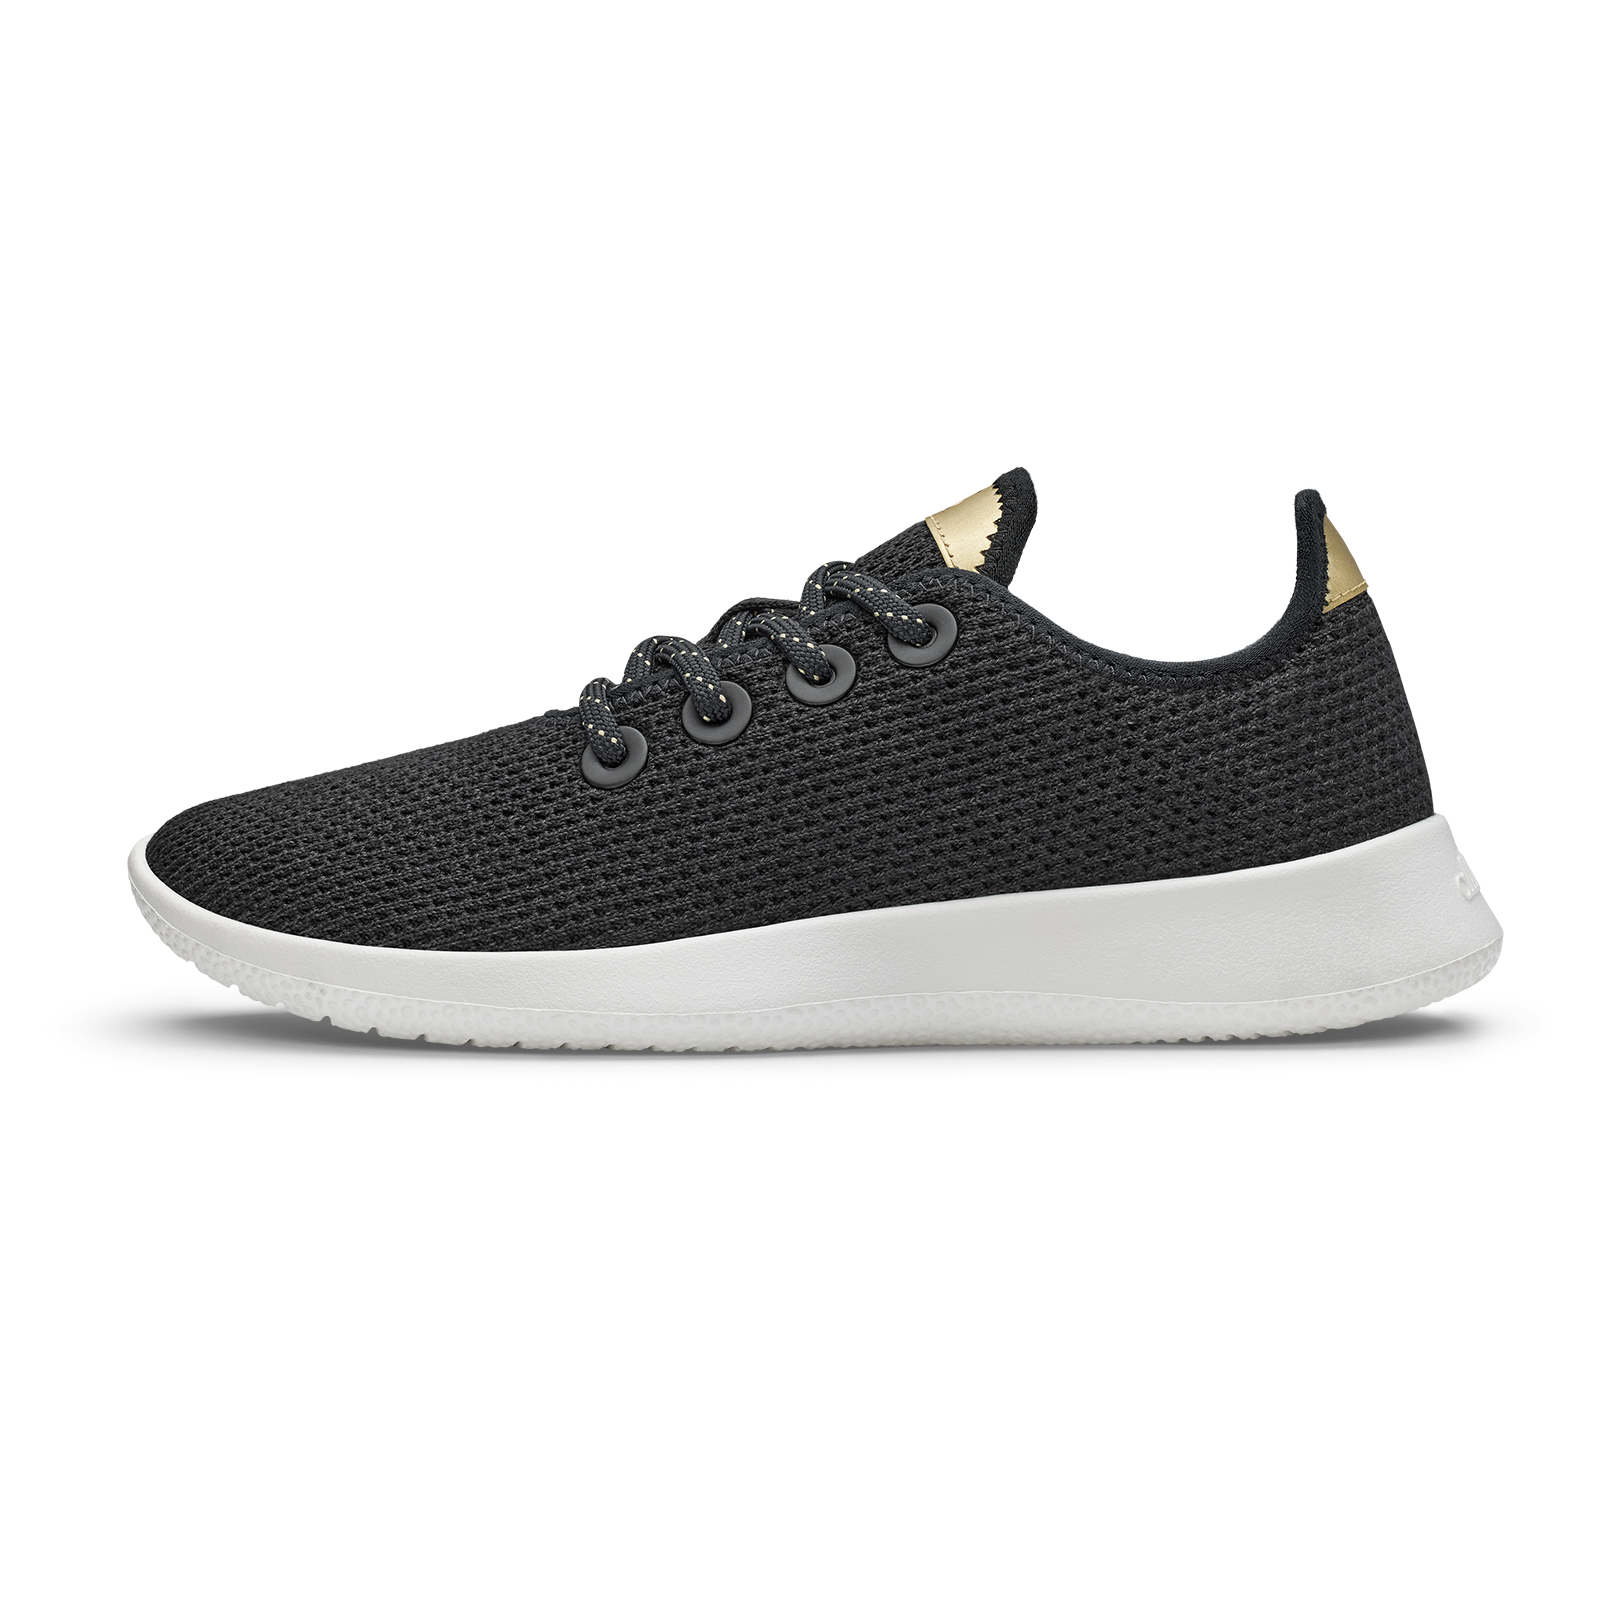 Women's Tree Runners - Earthly Elements - Natural Black / Dark Grey (Blizzard Sole)